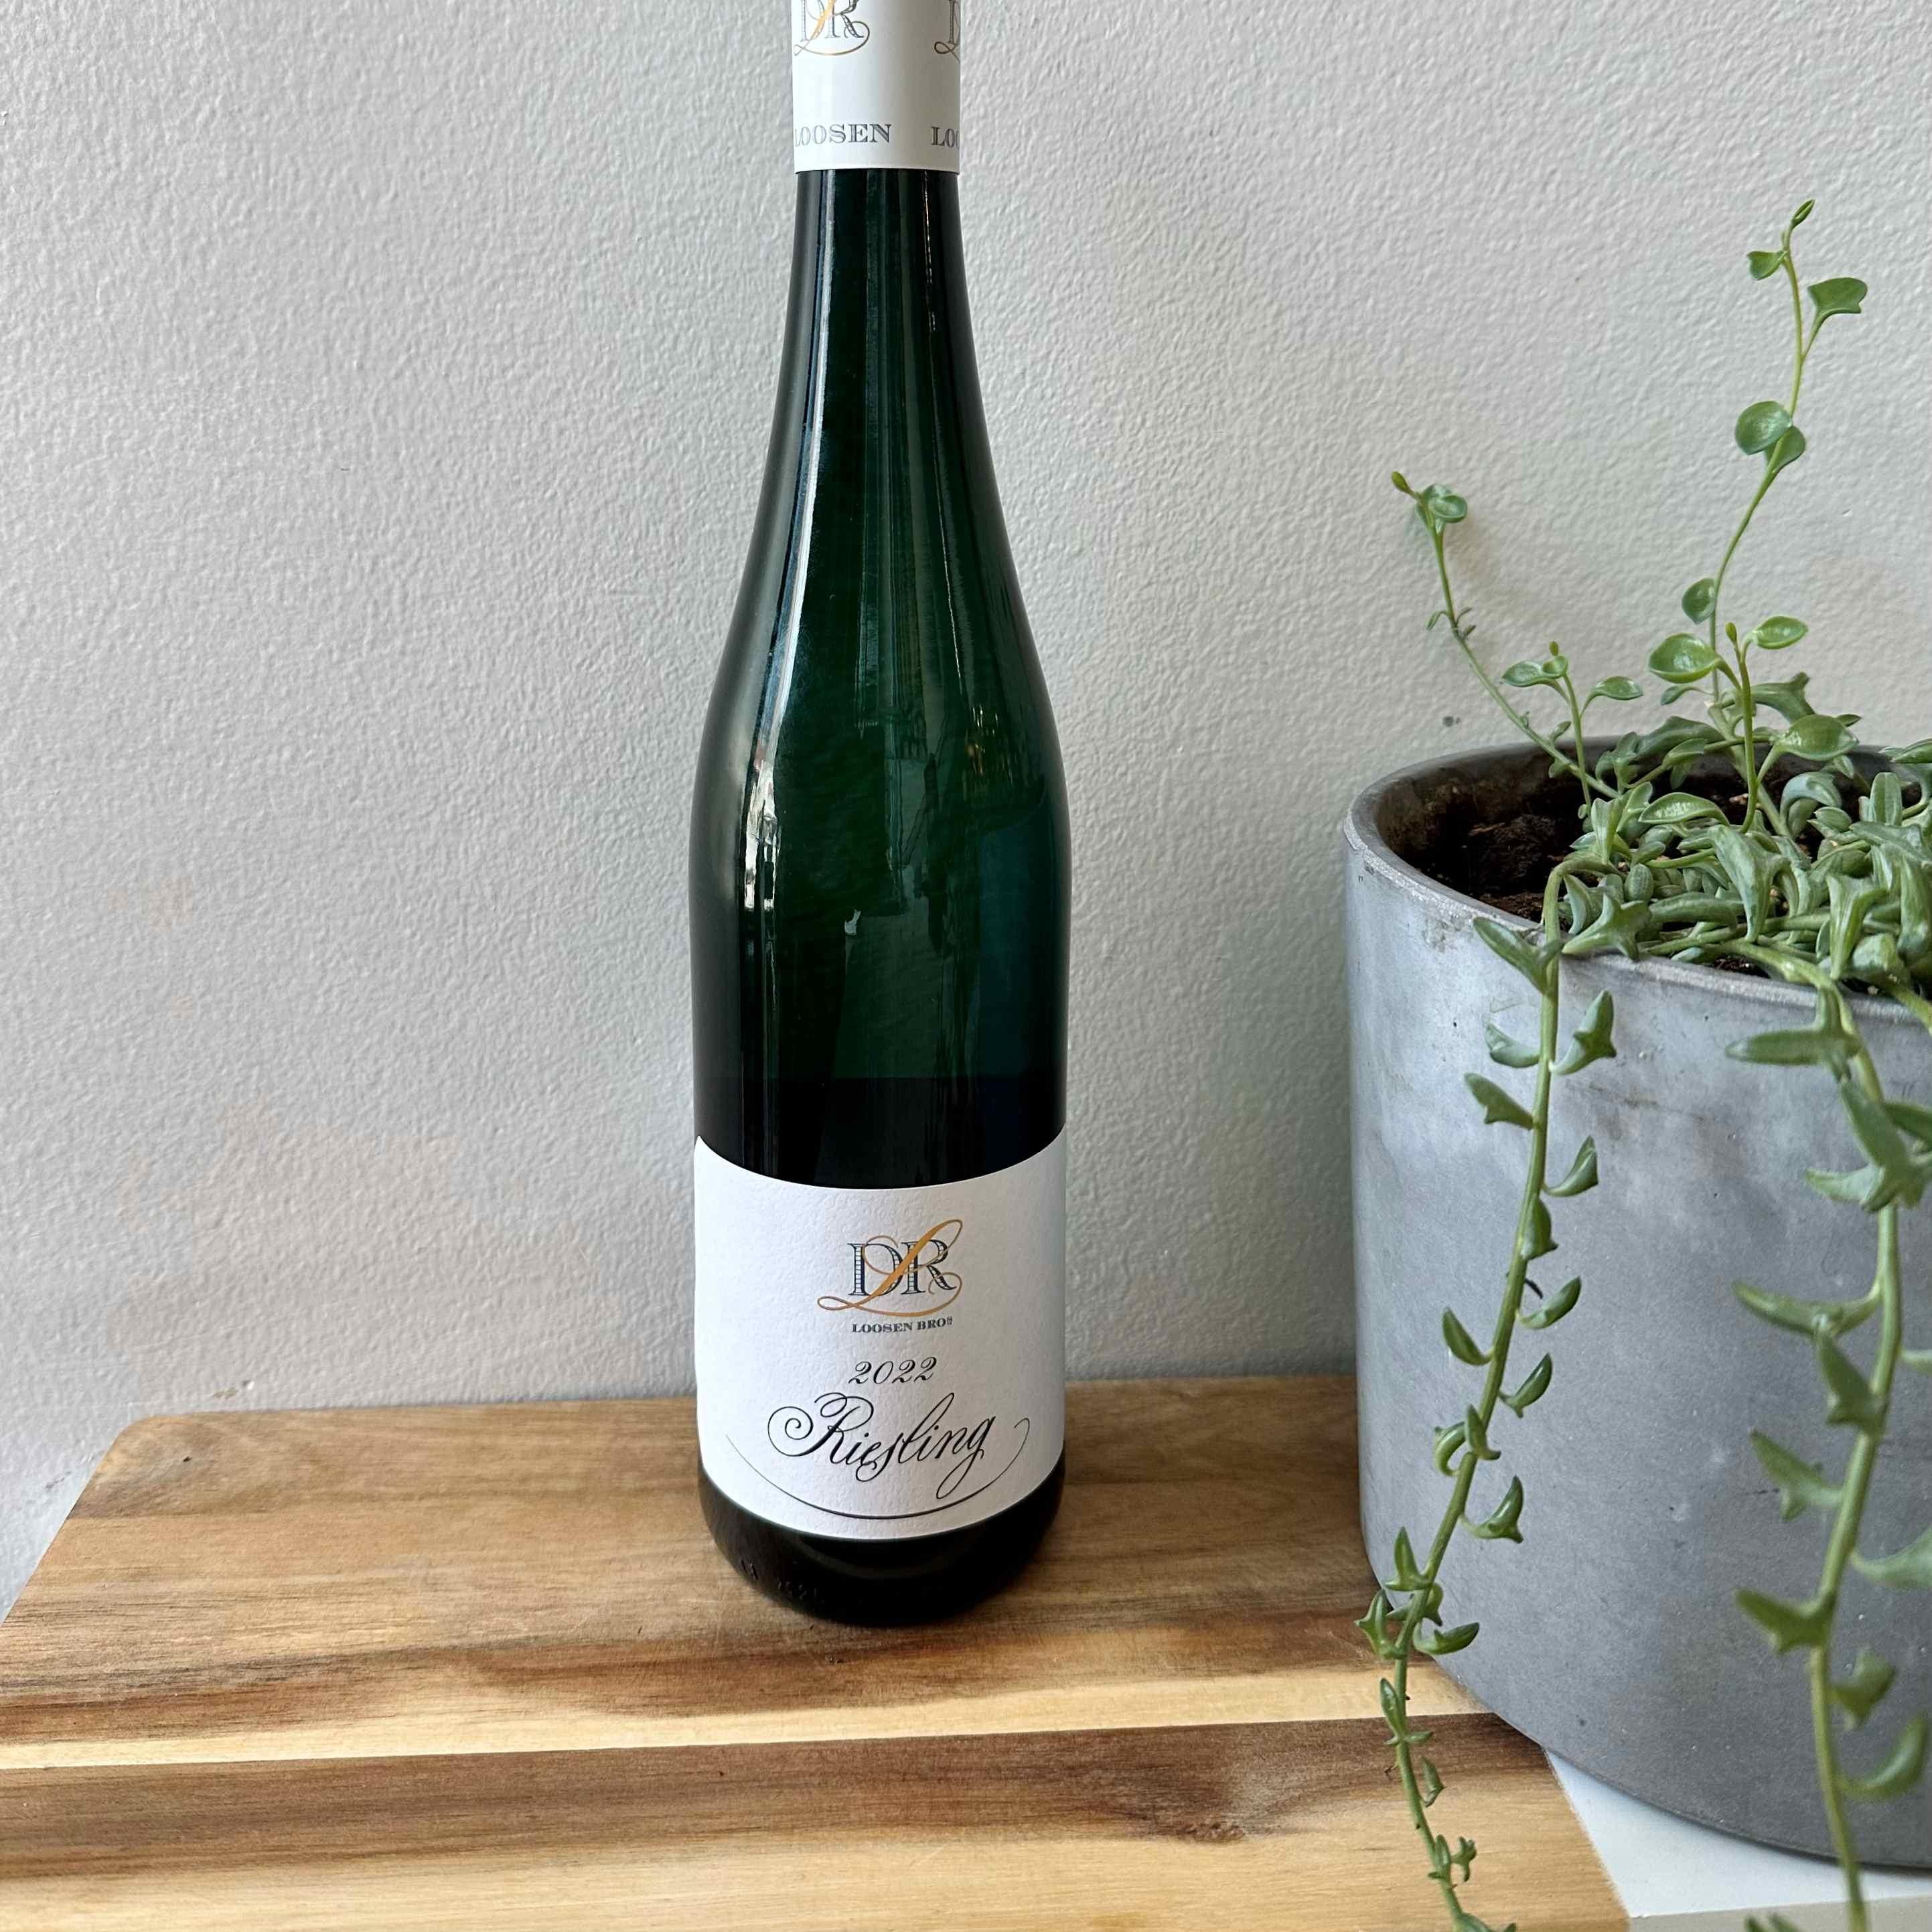 Loosen Brothers "Dr. L" Riesling 2021 Germany